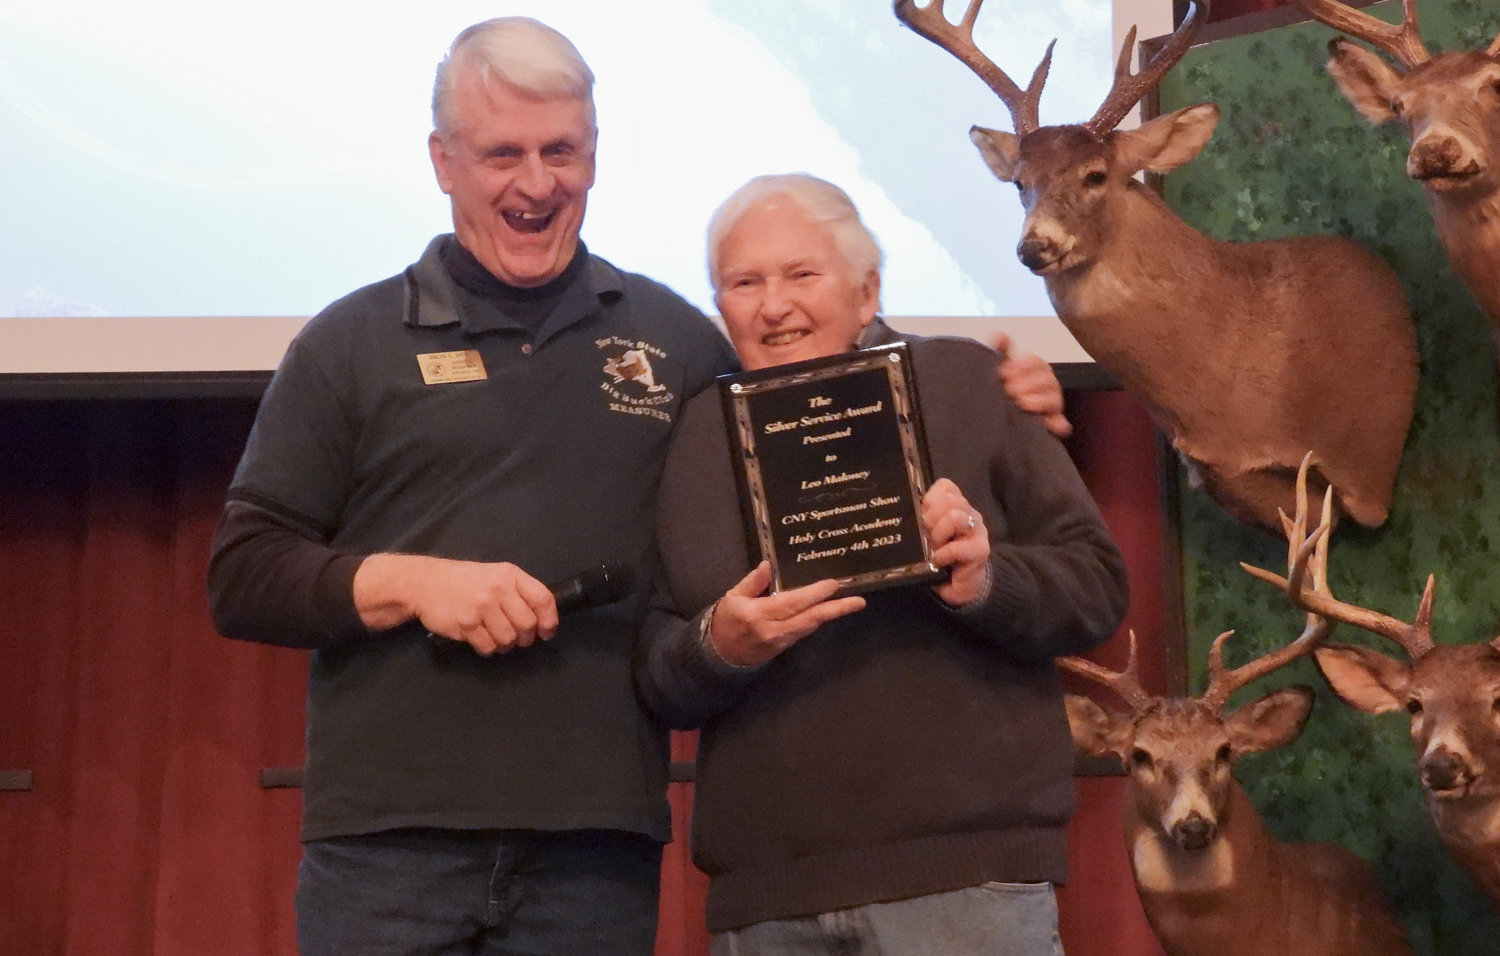 Leo Maloney is honored with the Silver Service at the CNY Sportsman Show on Sunday, Feb. 4, for his dedication and service to the CNY Sportsman Show since its inception